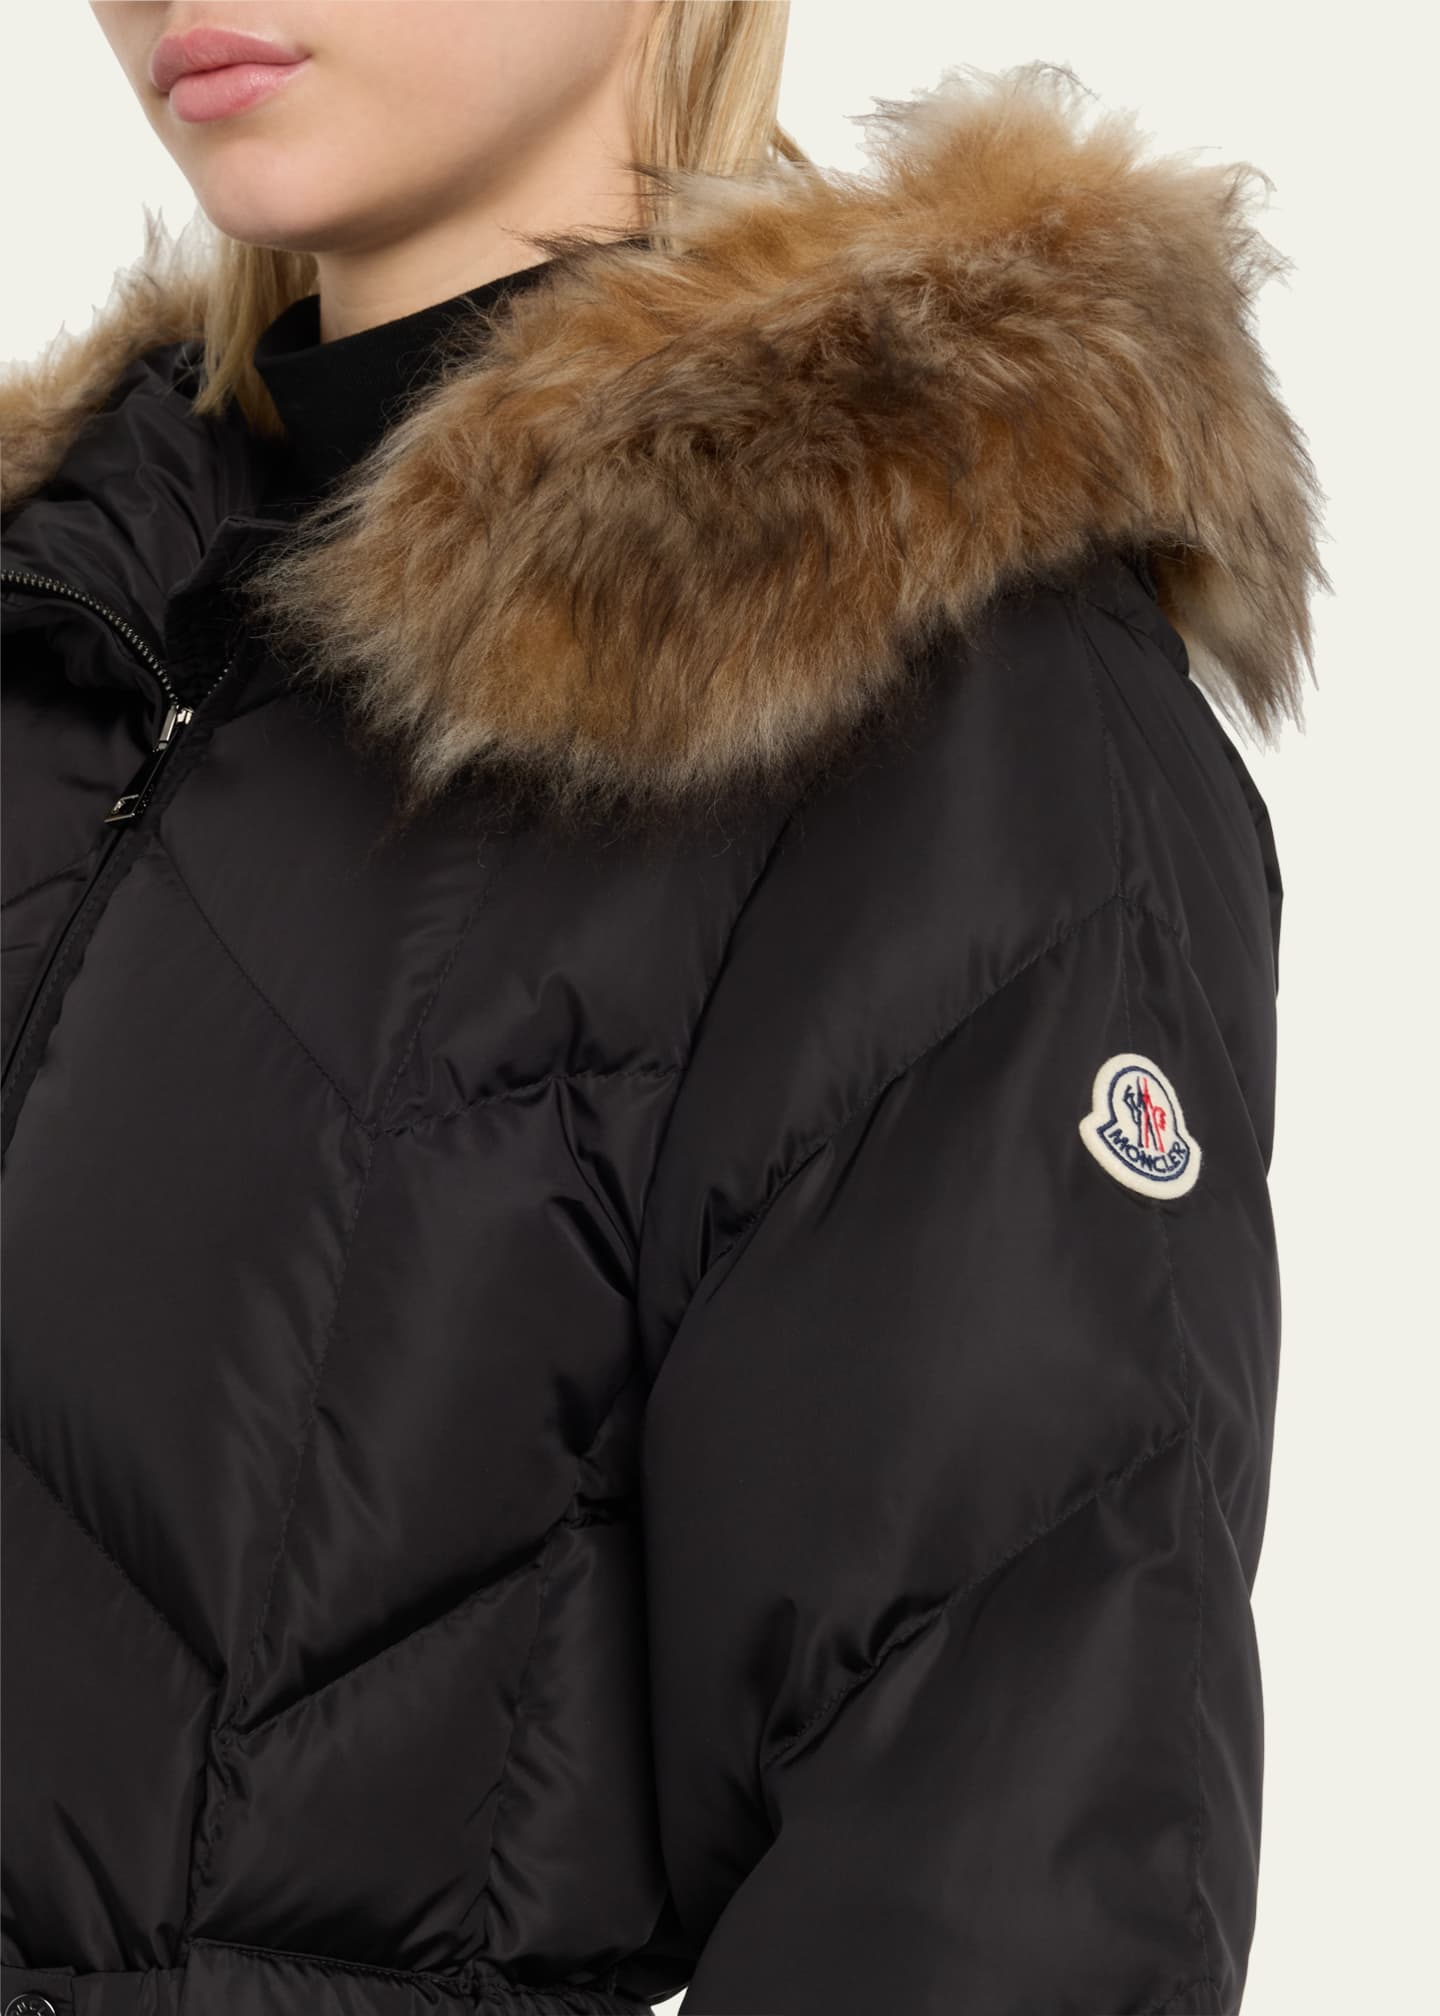 Moncler Loriot Belted Puffer Jacket with Faux Fur Ruff - Bergdorf Goodman